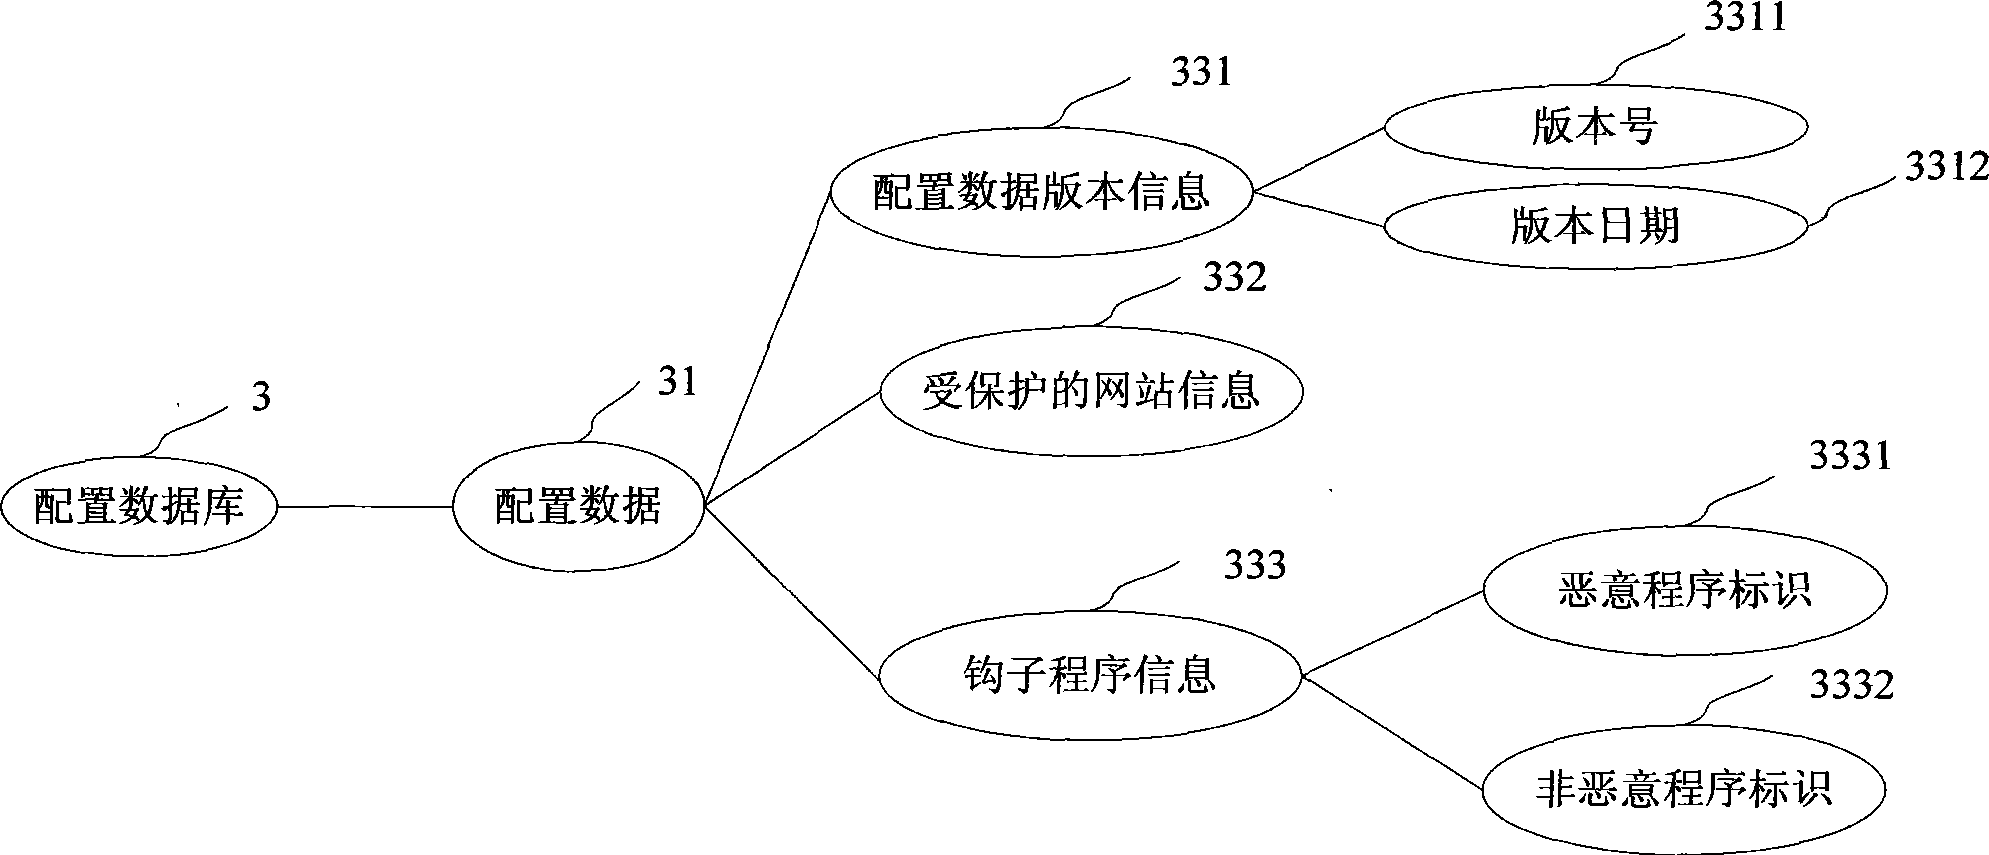 System and method for input content protection of browser